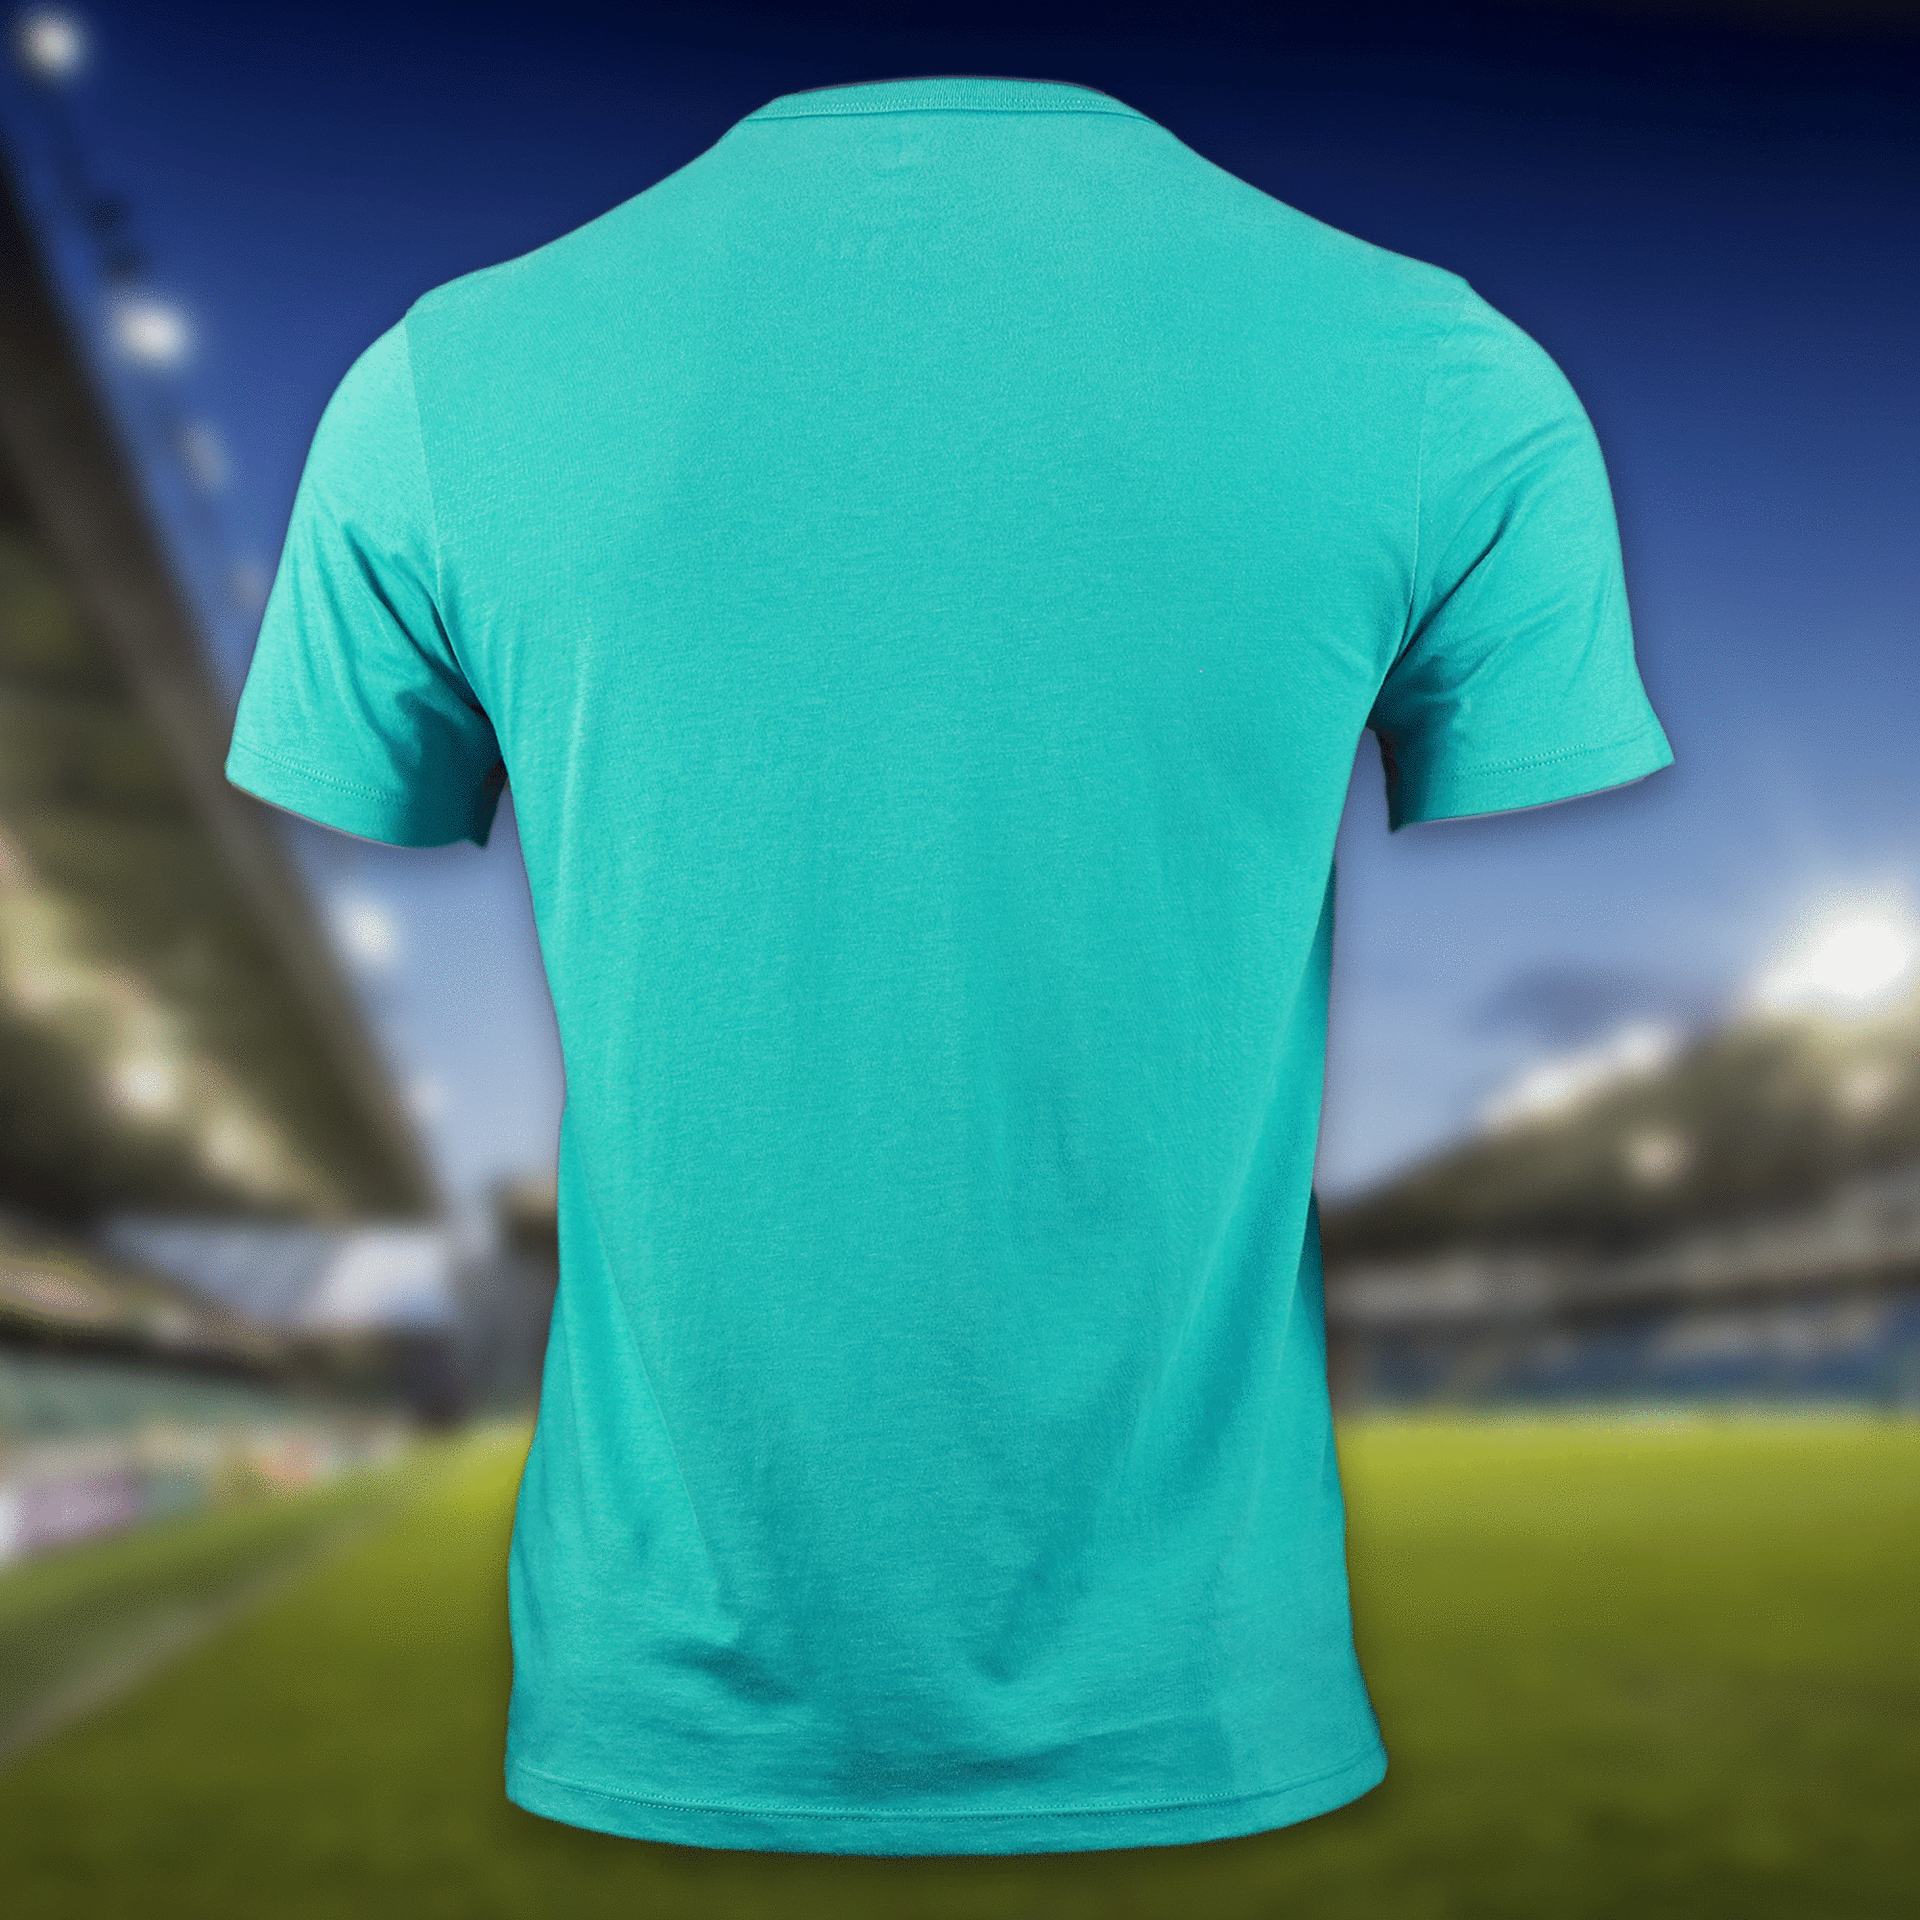 The backside of the Throwback Miami Dolphins Worn Printed 1974 Dolphins Logo Tshirt | Oceanic Teal Tshirt